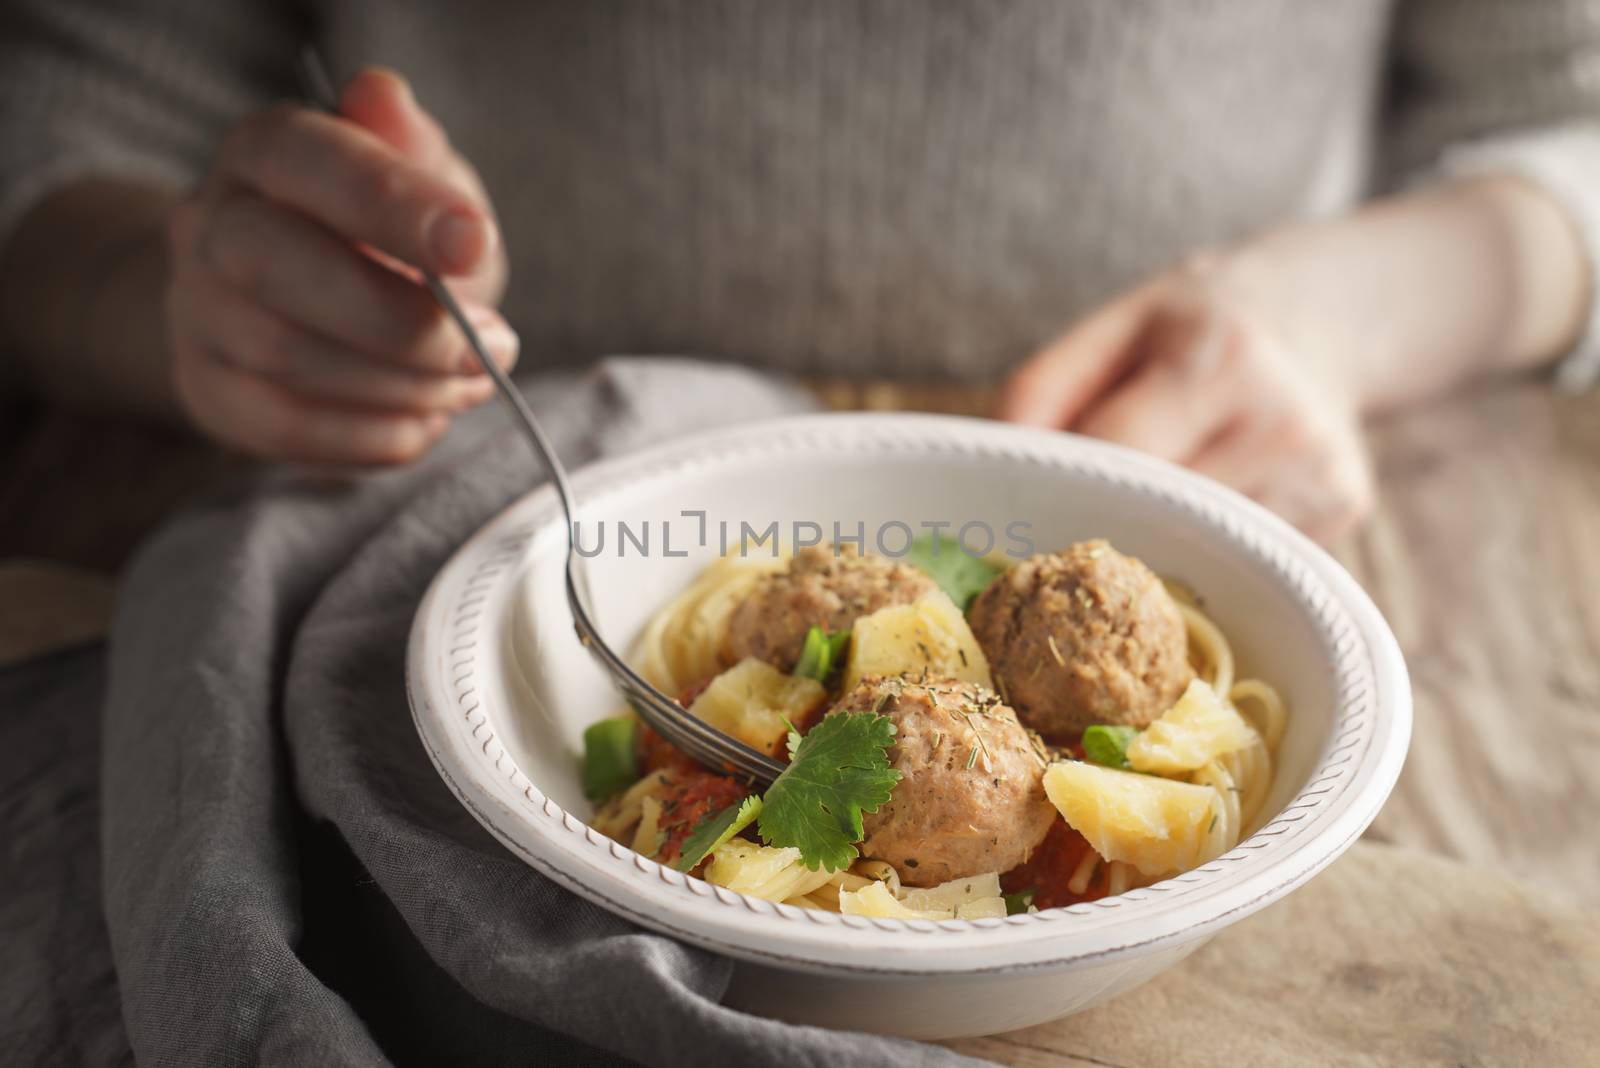 Woman eating spaghetti with meatballs from a bowl by Deniskarpenkov